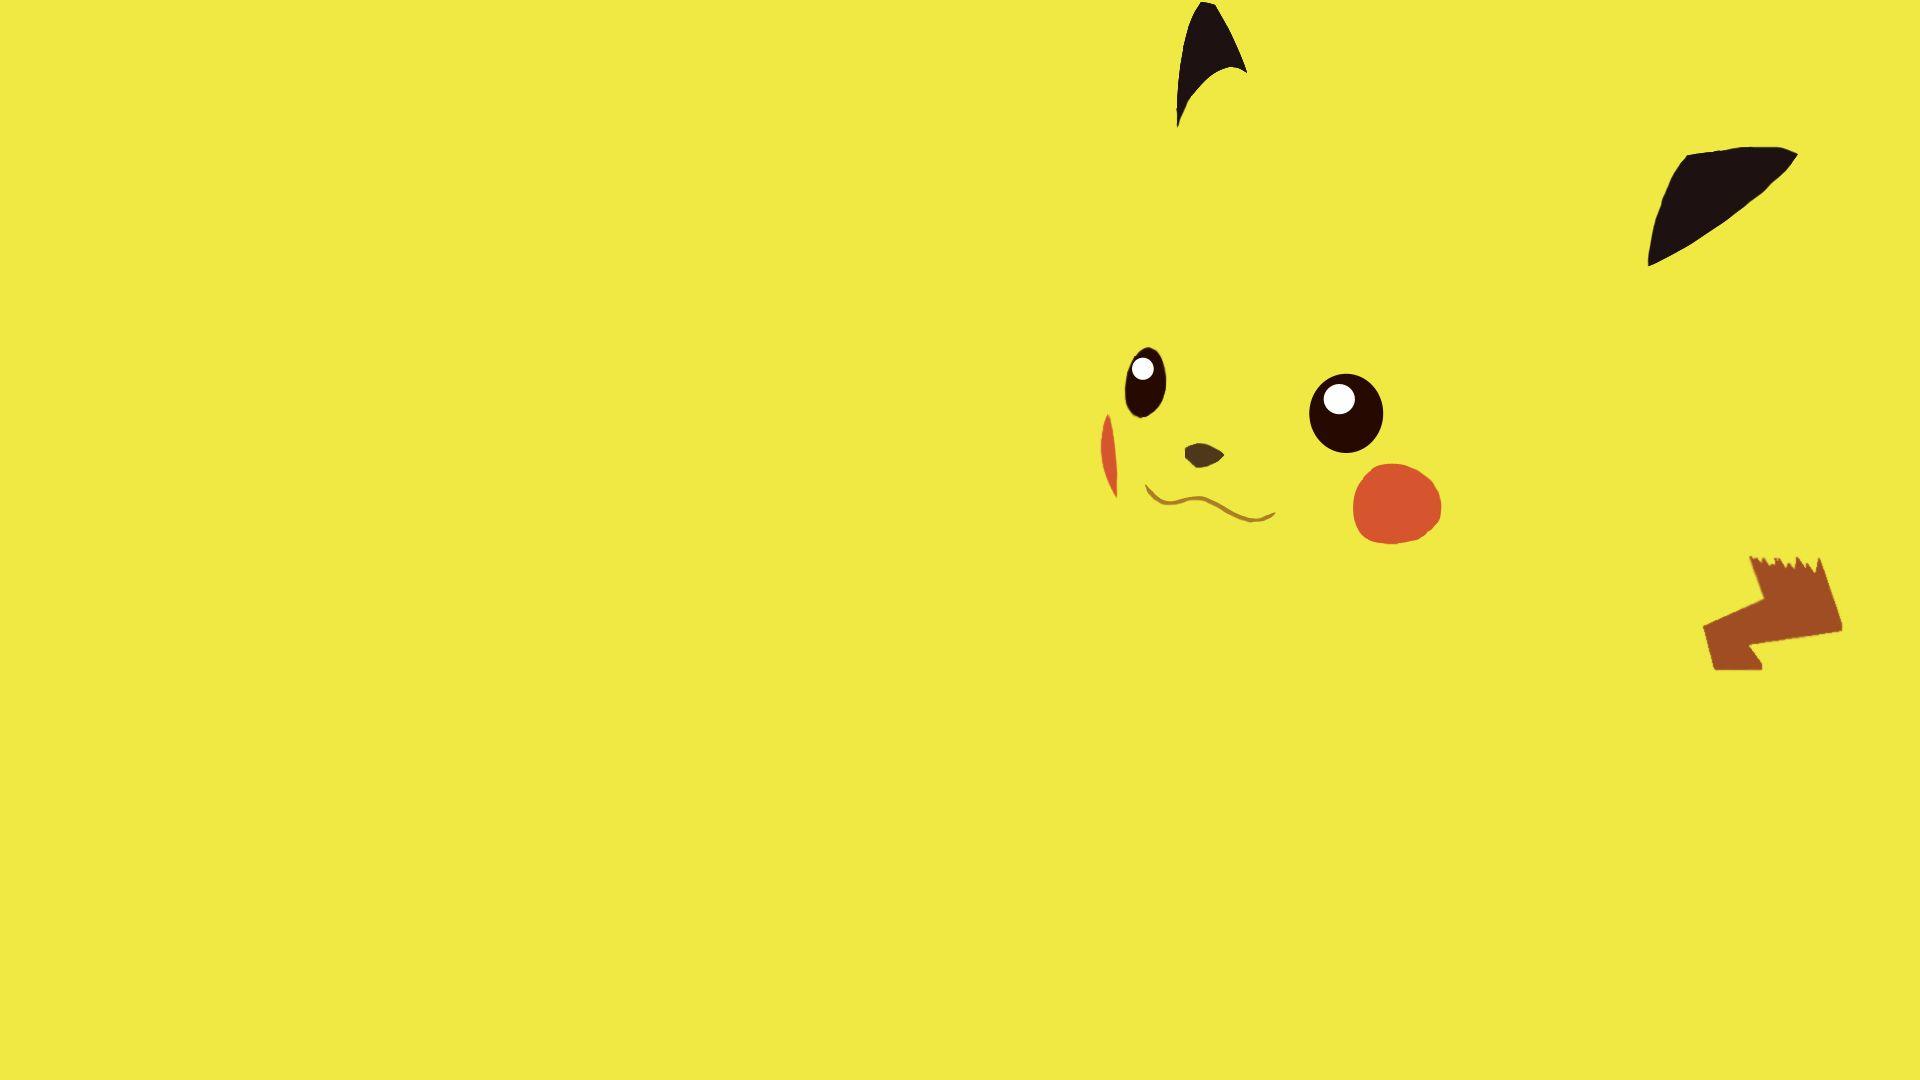 More Like Pikachu Wallpaper By DR ANGUS